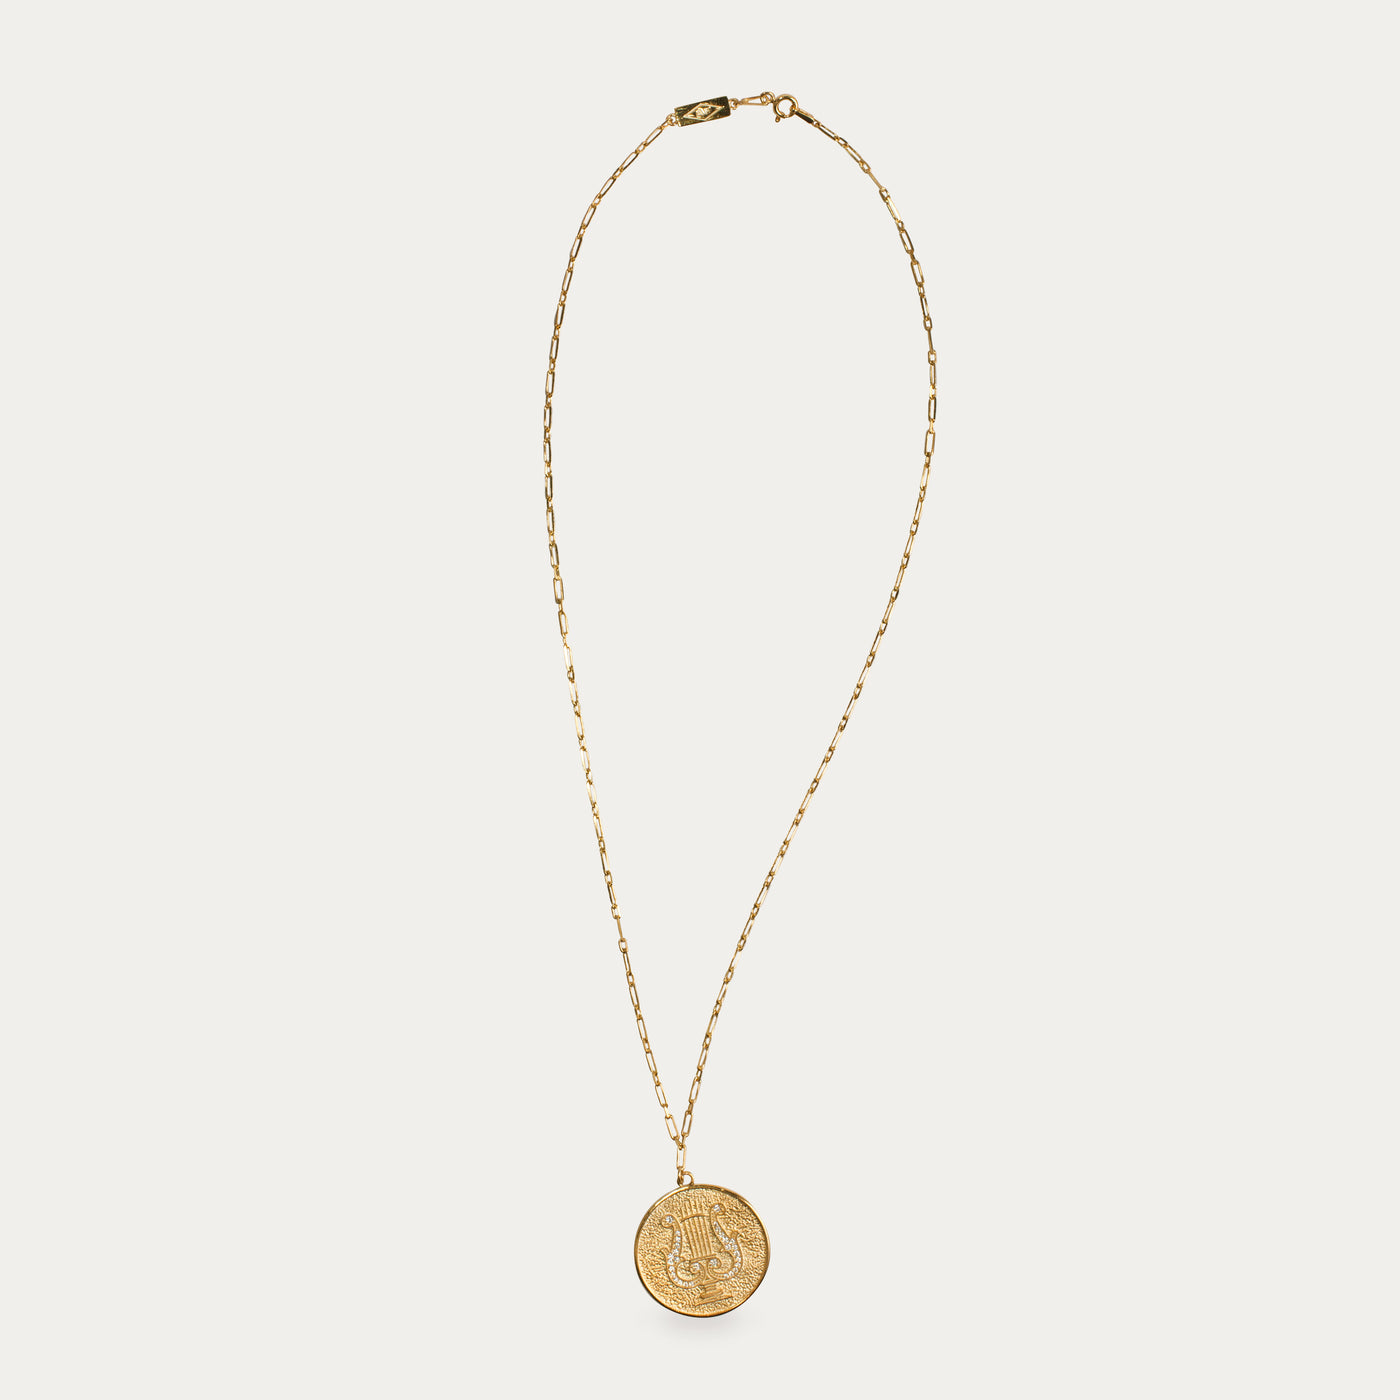 GOLDEN LYRE COIN NECKLACE